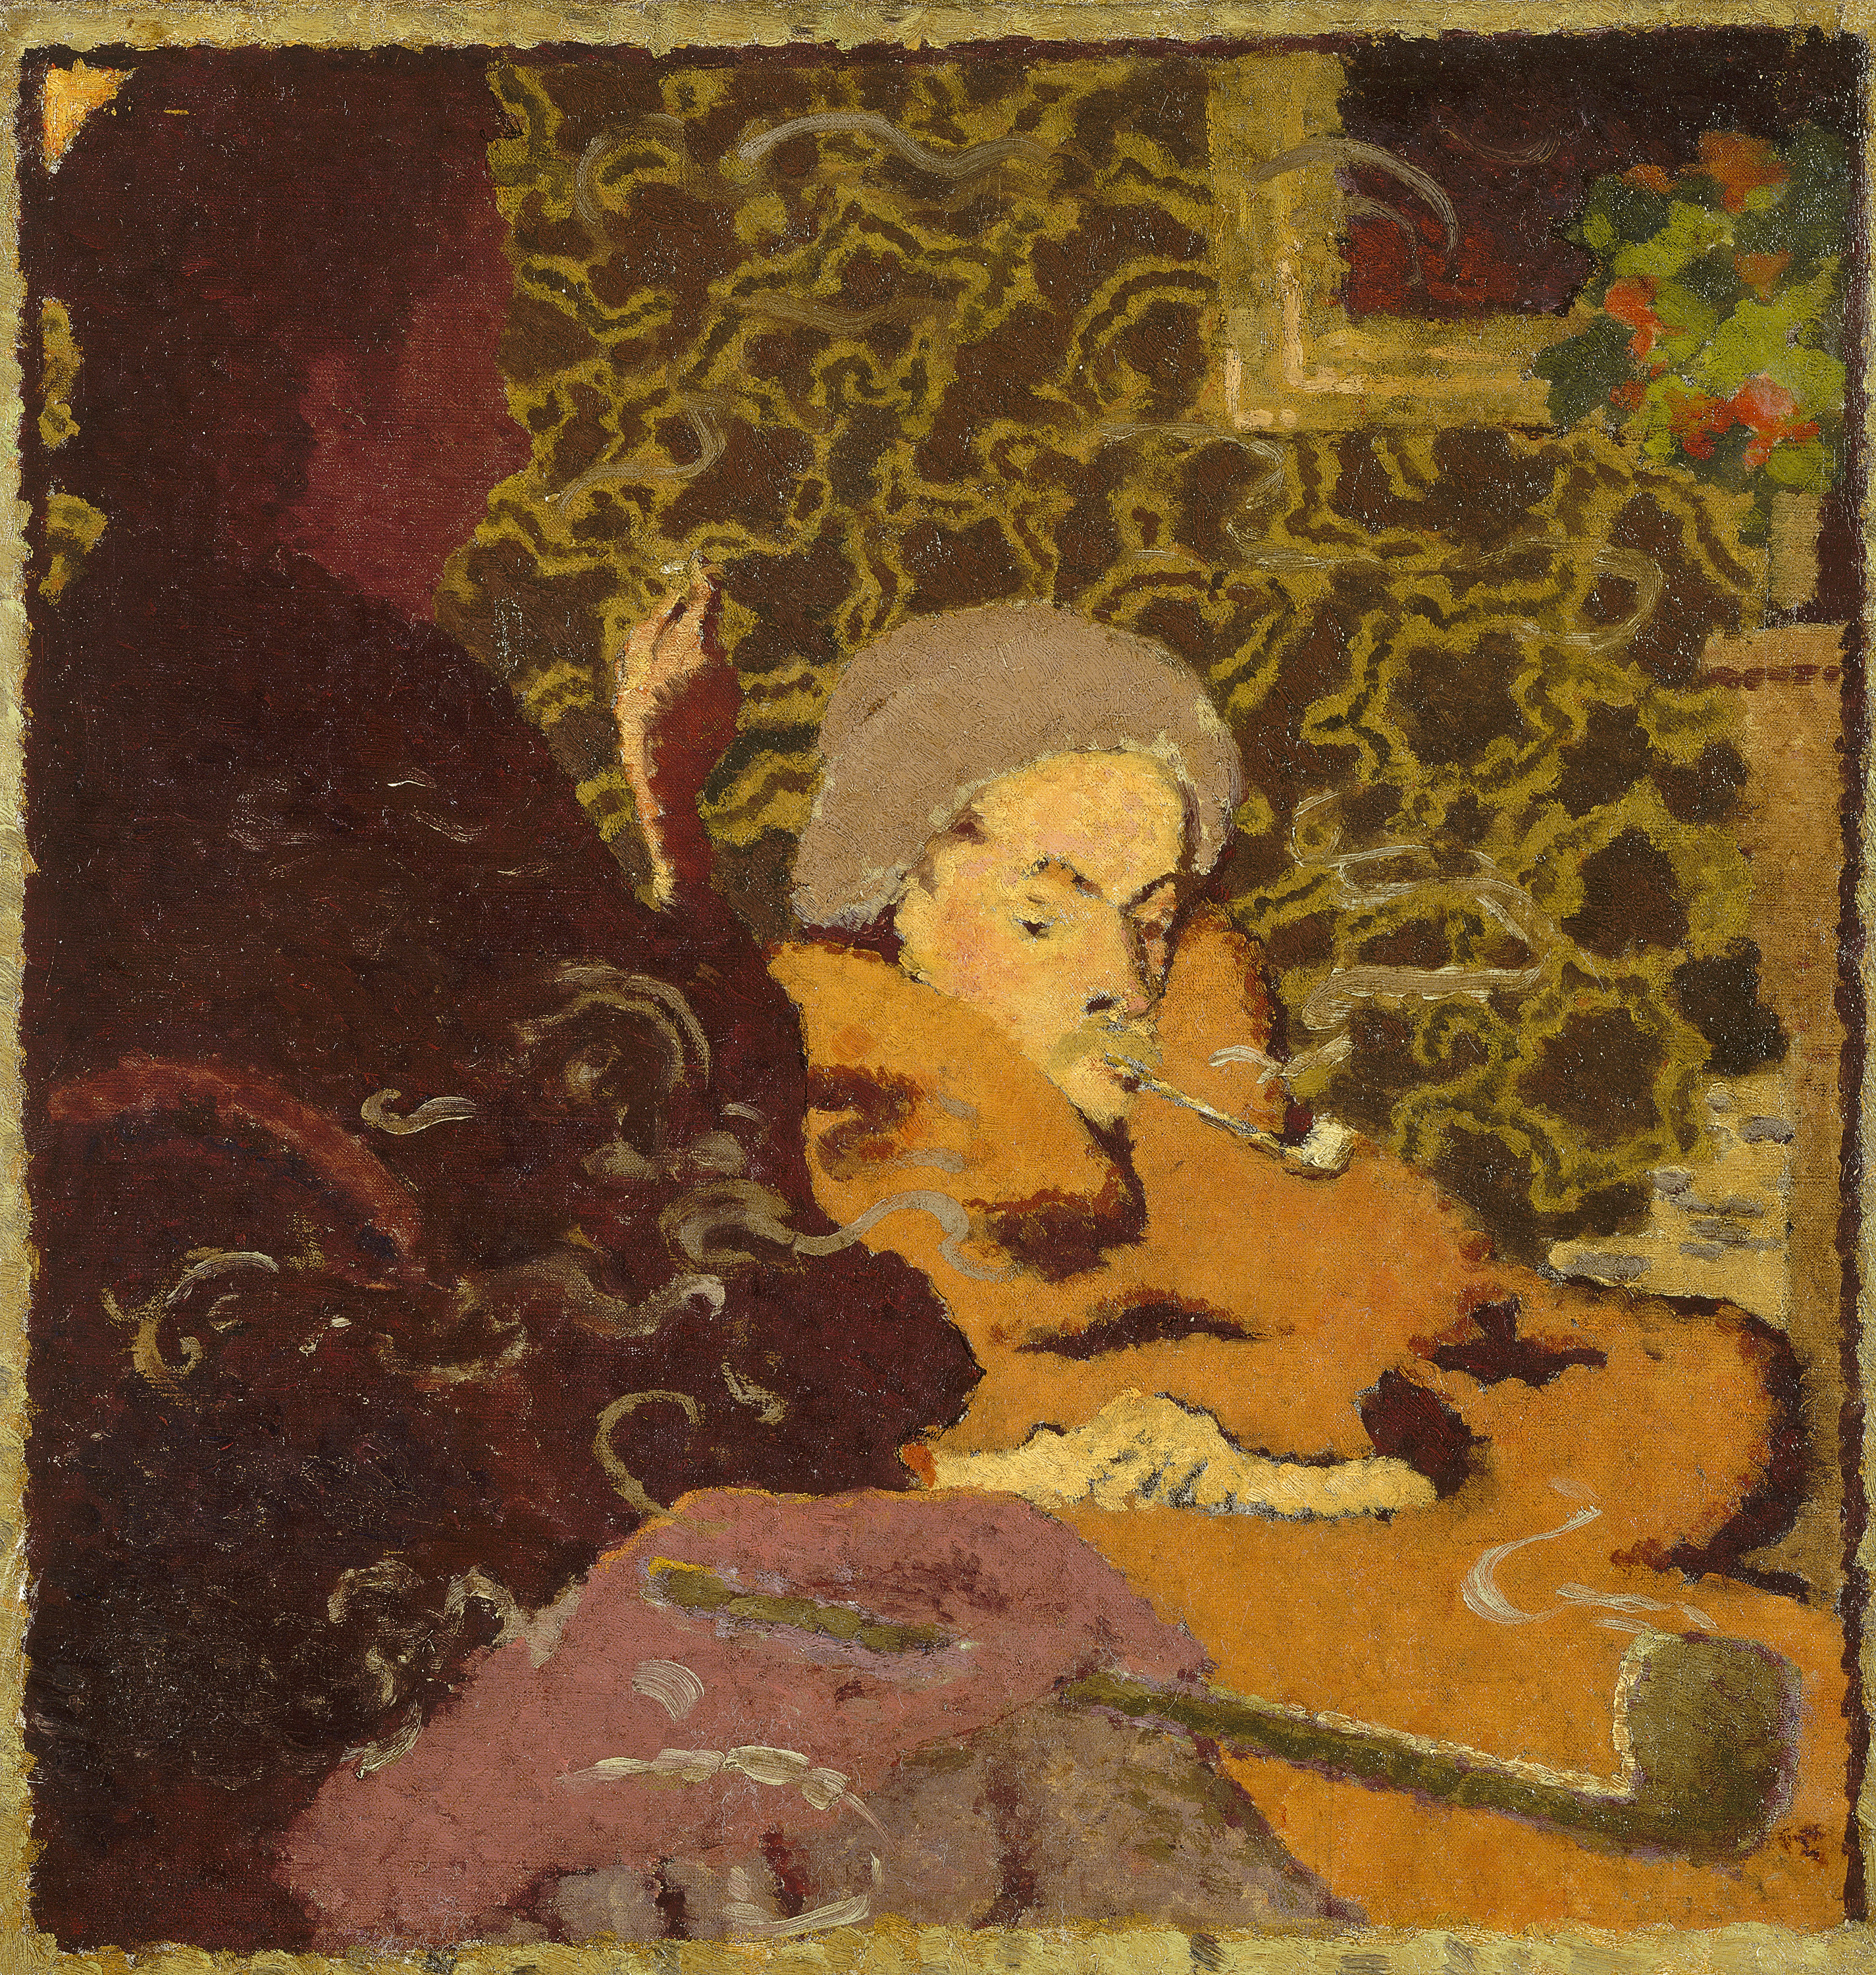 An oil painting in brown tones, showing several figures smoking in an interior.